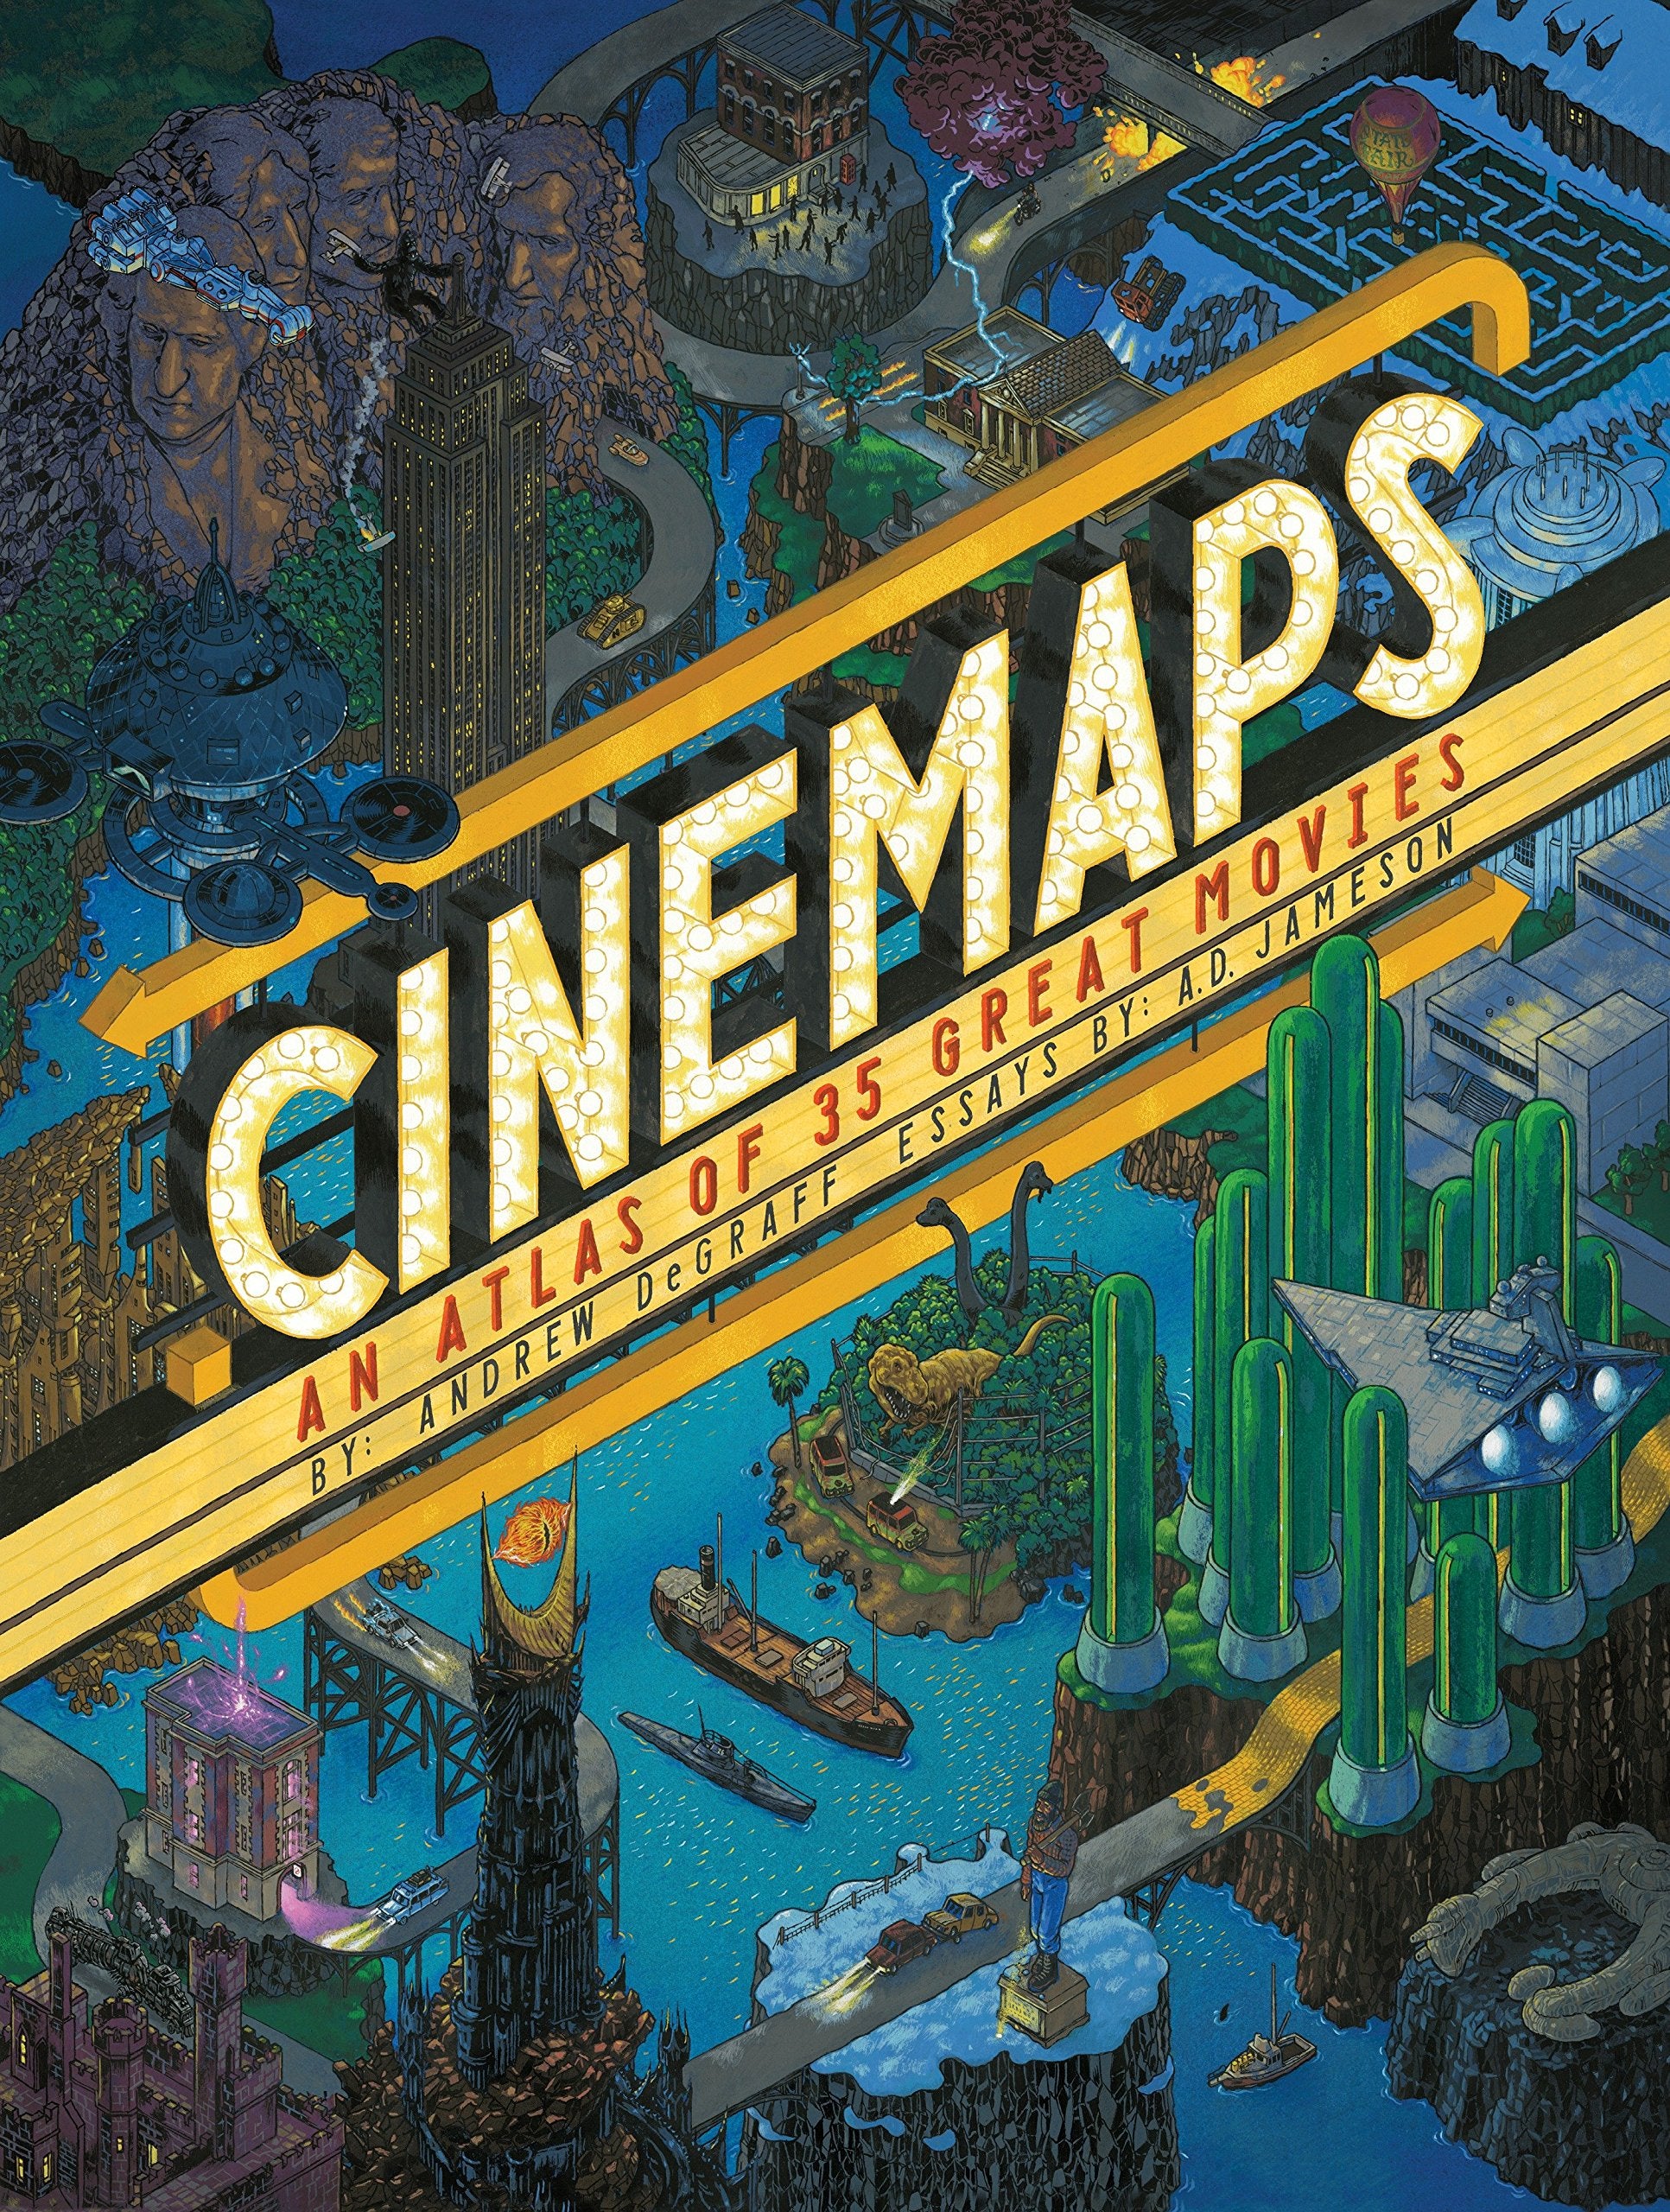 CINEMAPS:AN ATLAS OF 35 GREAT MOVIES